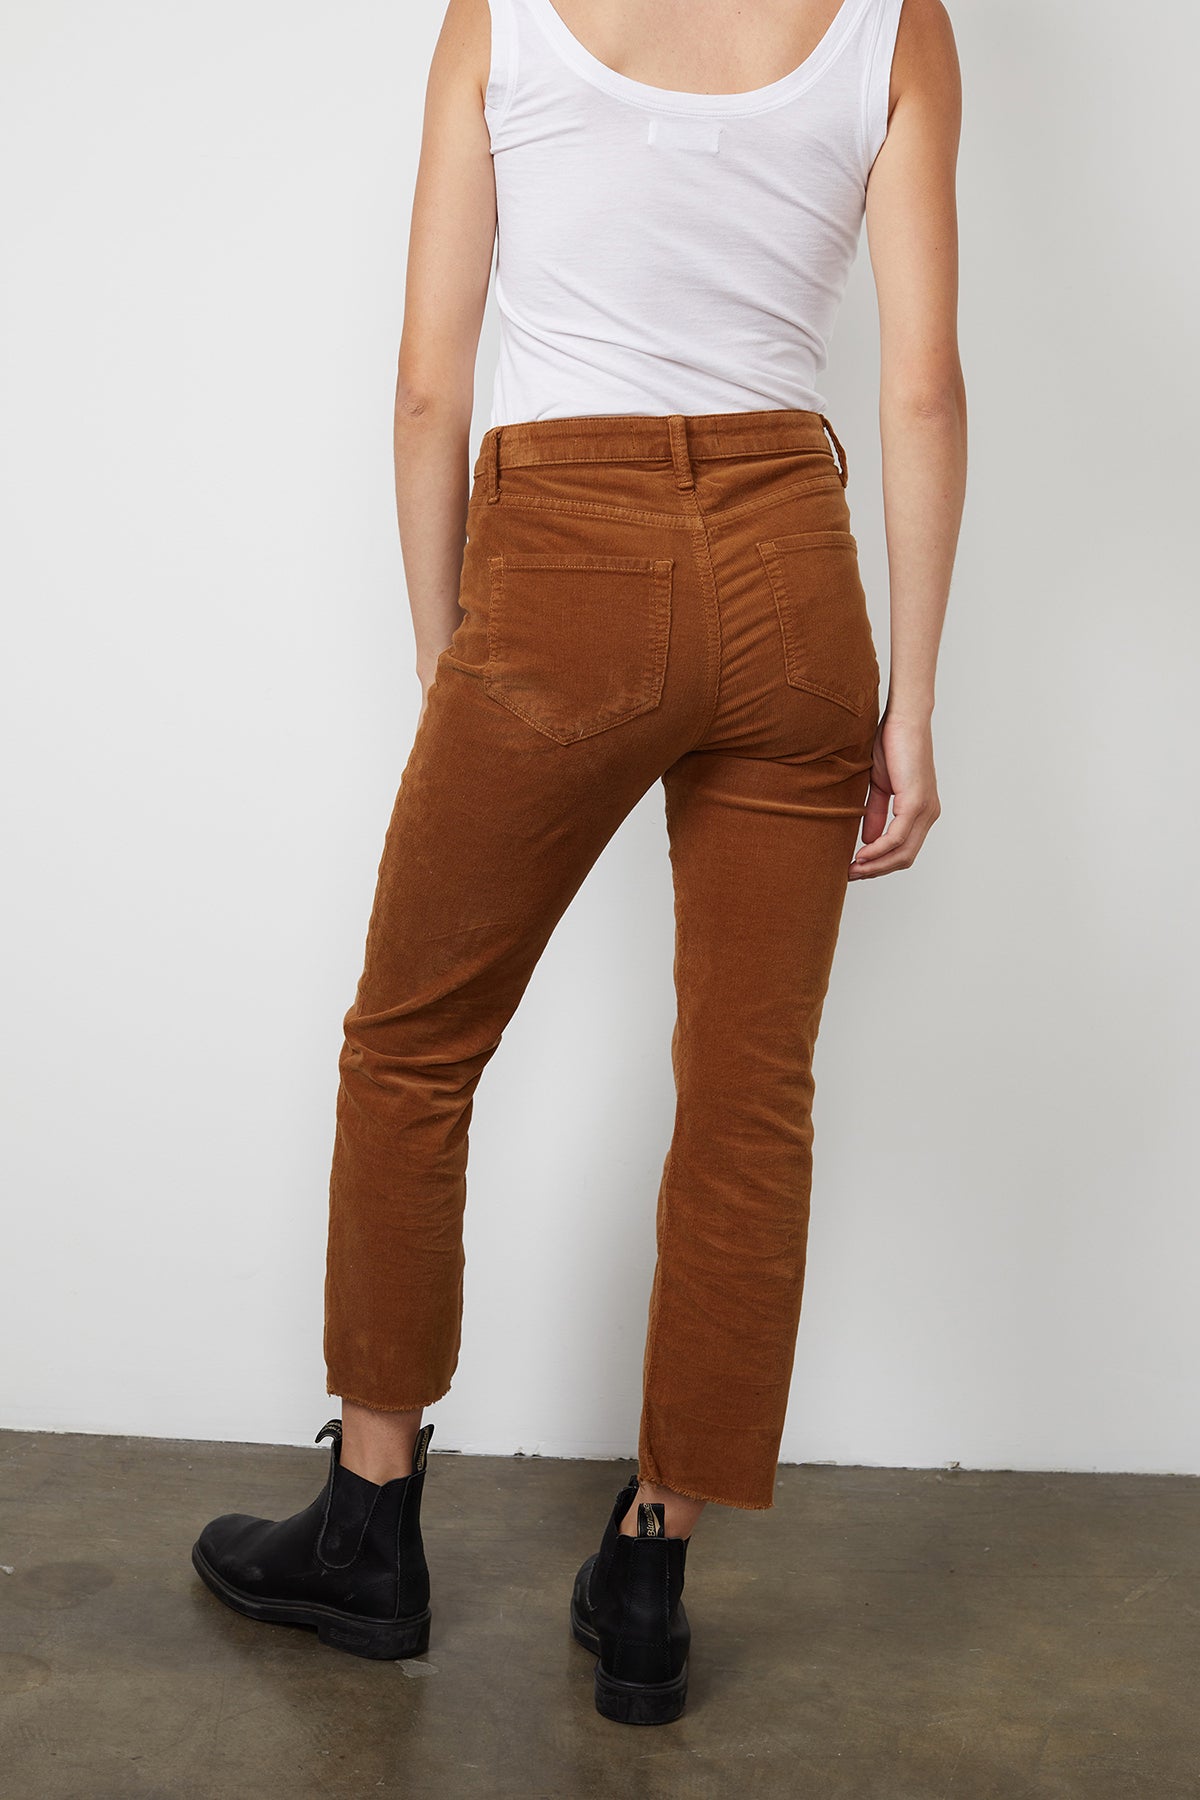   The back view of a person wearing Velvet by Graham & Spencer's CANDACE CORDUROY HIGH RISE CROP JEAN. 